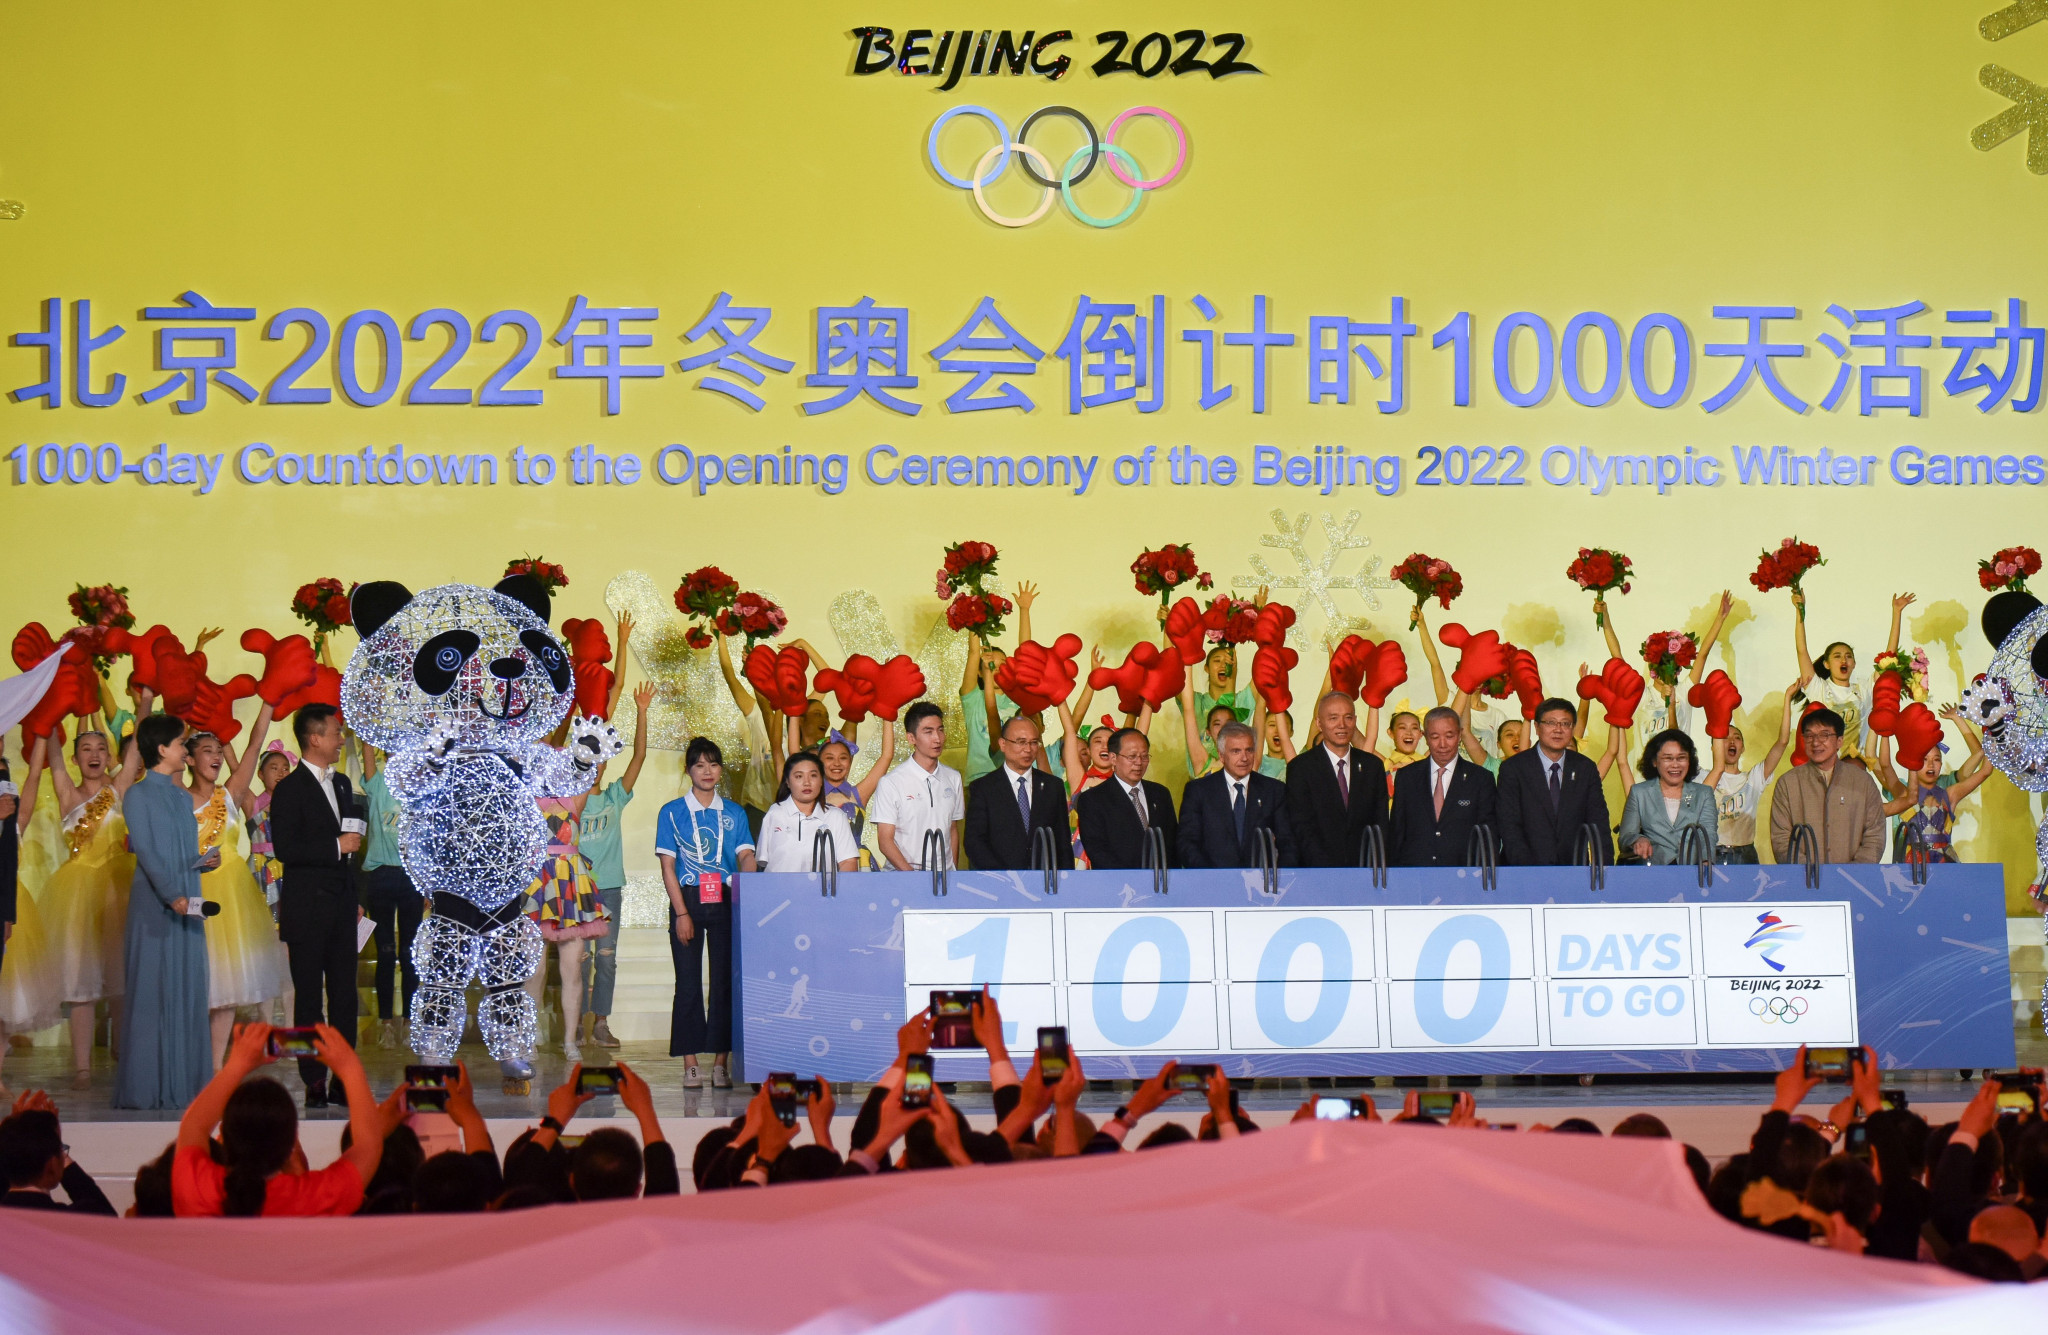 IOC vice-president Juan Antonio Samaranch Junior was among sports dignitaries helping to mark the 1,000-day countdown for the Beijing 2022 Winter Olympics ©Getty Images